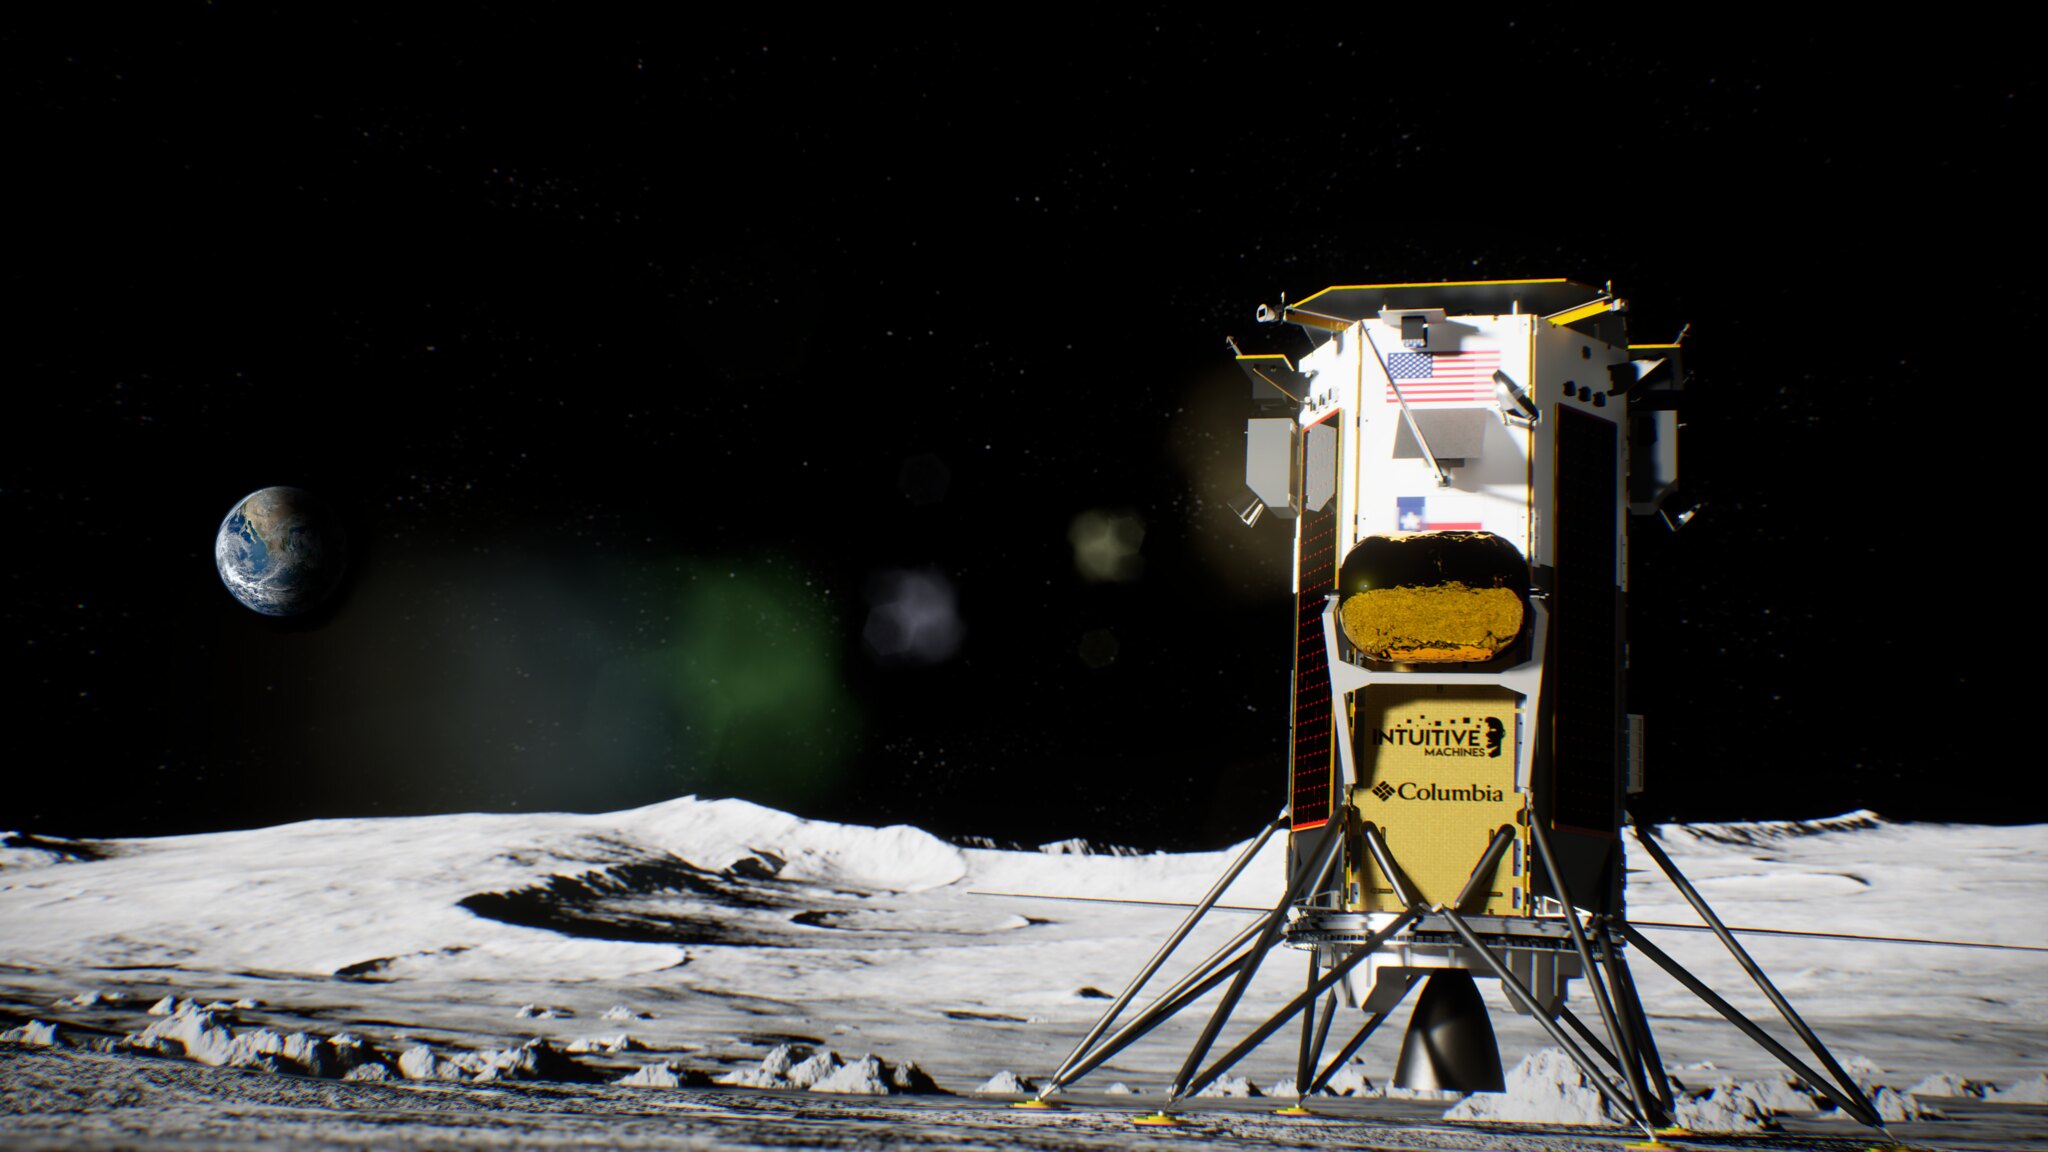 Intuitive Machines's Nova-C lunar lander launched on February 15, 2024 to deliver 6 NASA CLPS science payloads to Malapert A.